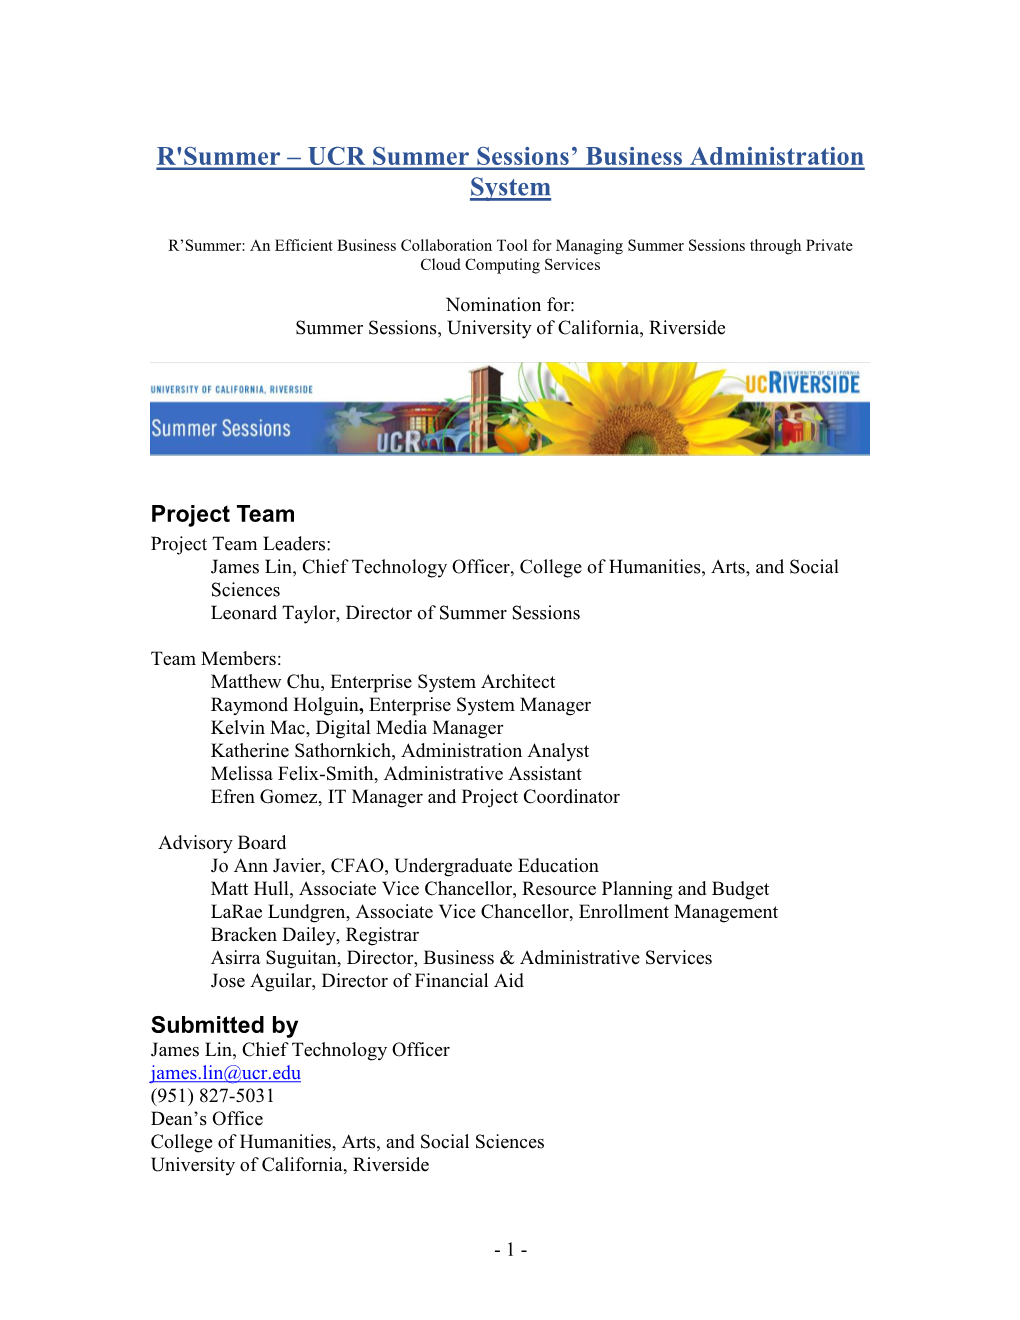 UCR Summer Sessions' Business Administration System (Pdf)